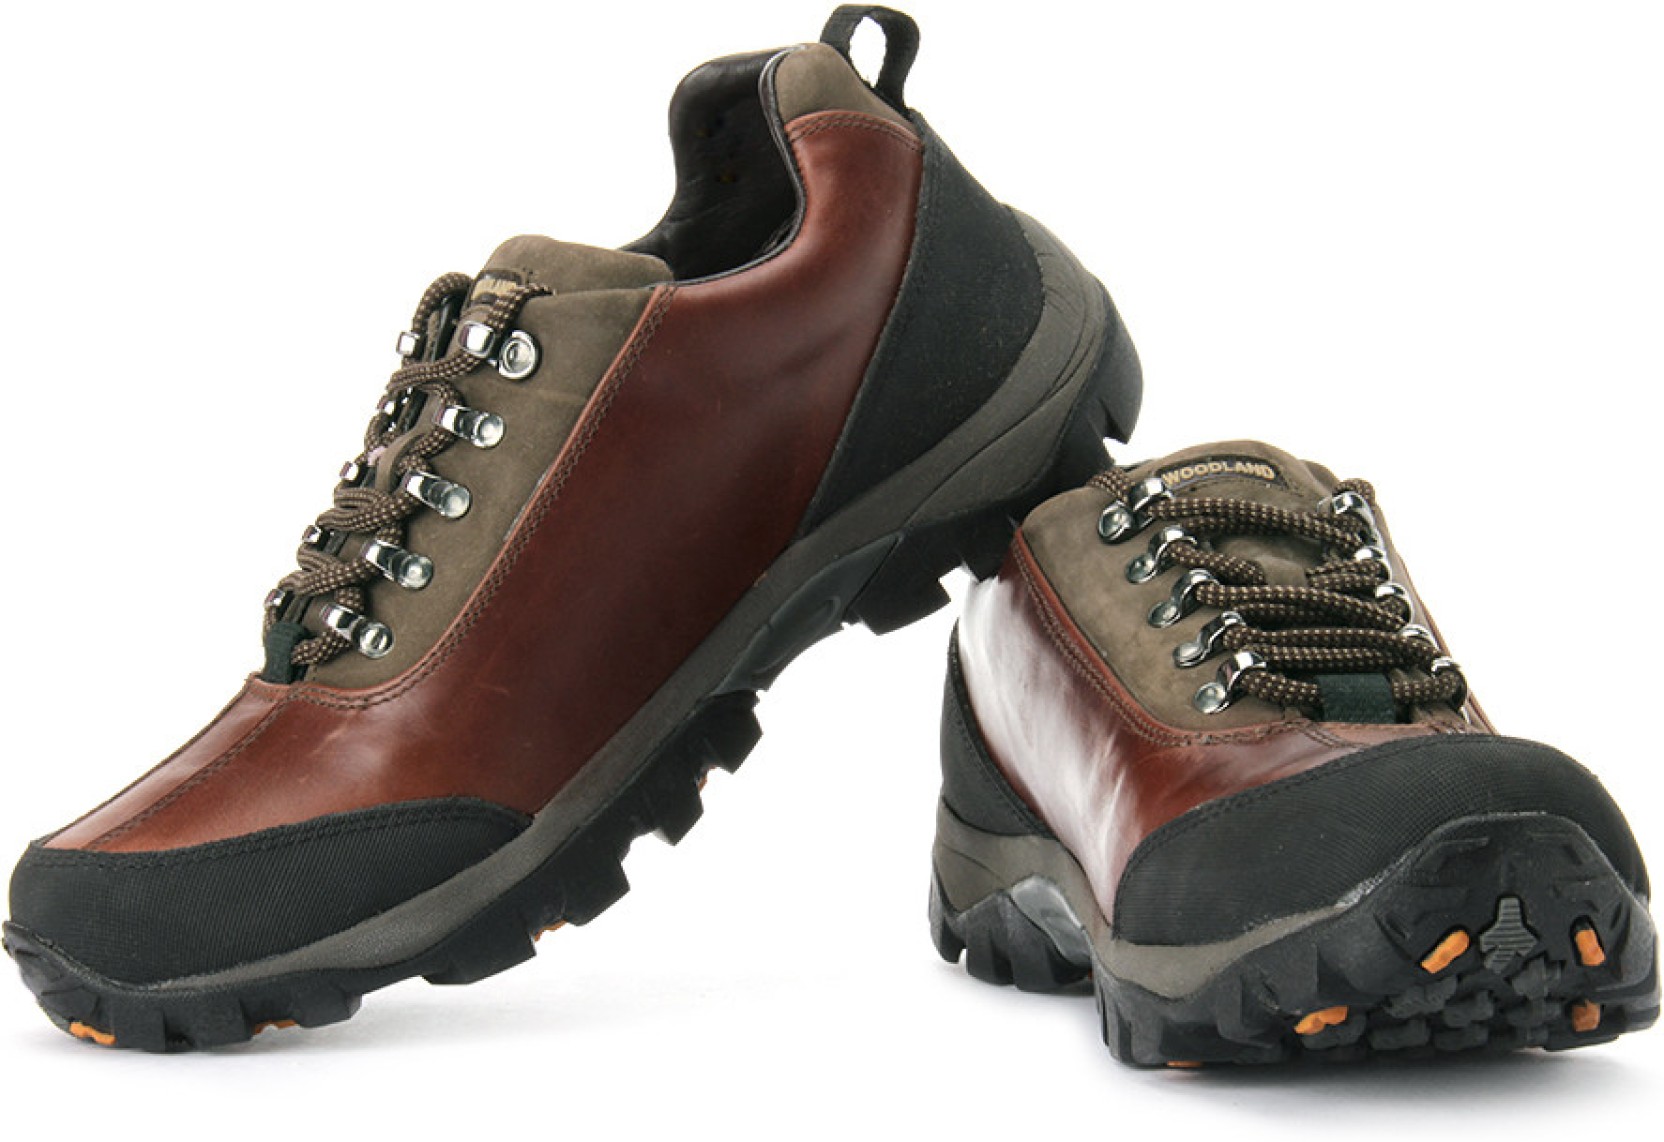 Woodland Outdoors Shoes - Buy Bordo Color Woodland Outdoors Shoes ...